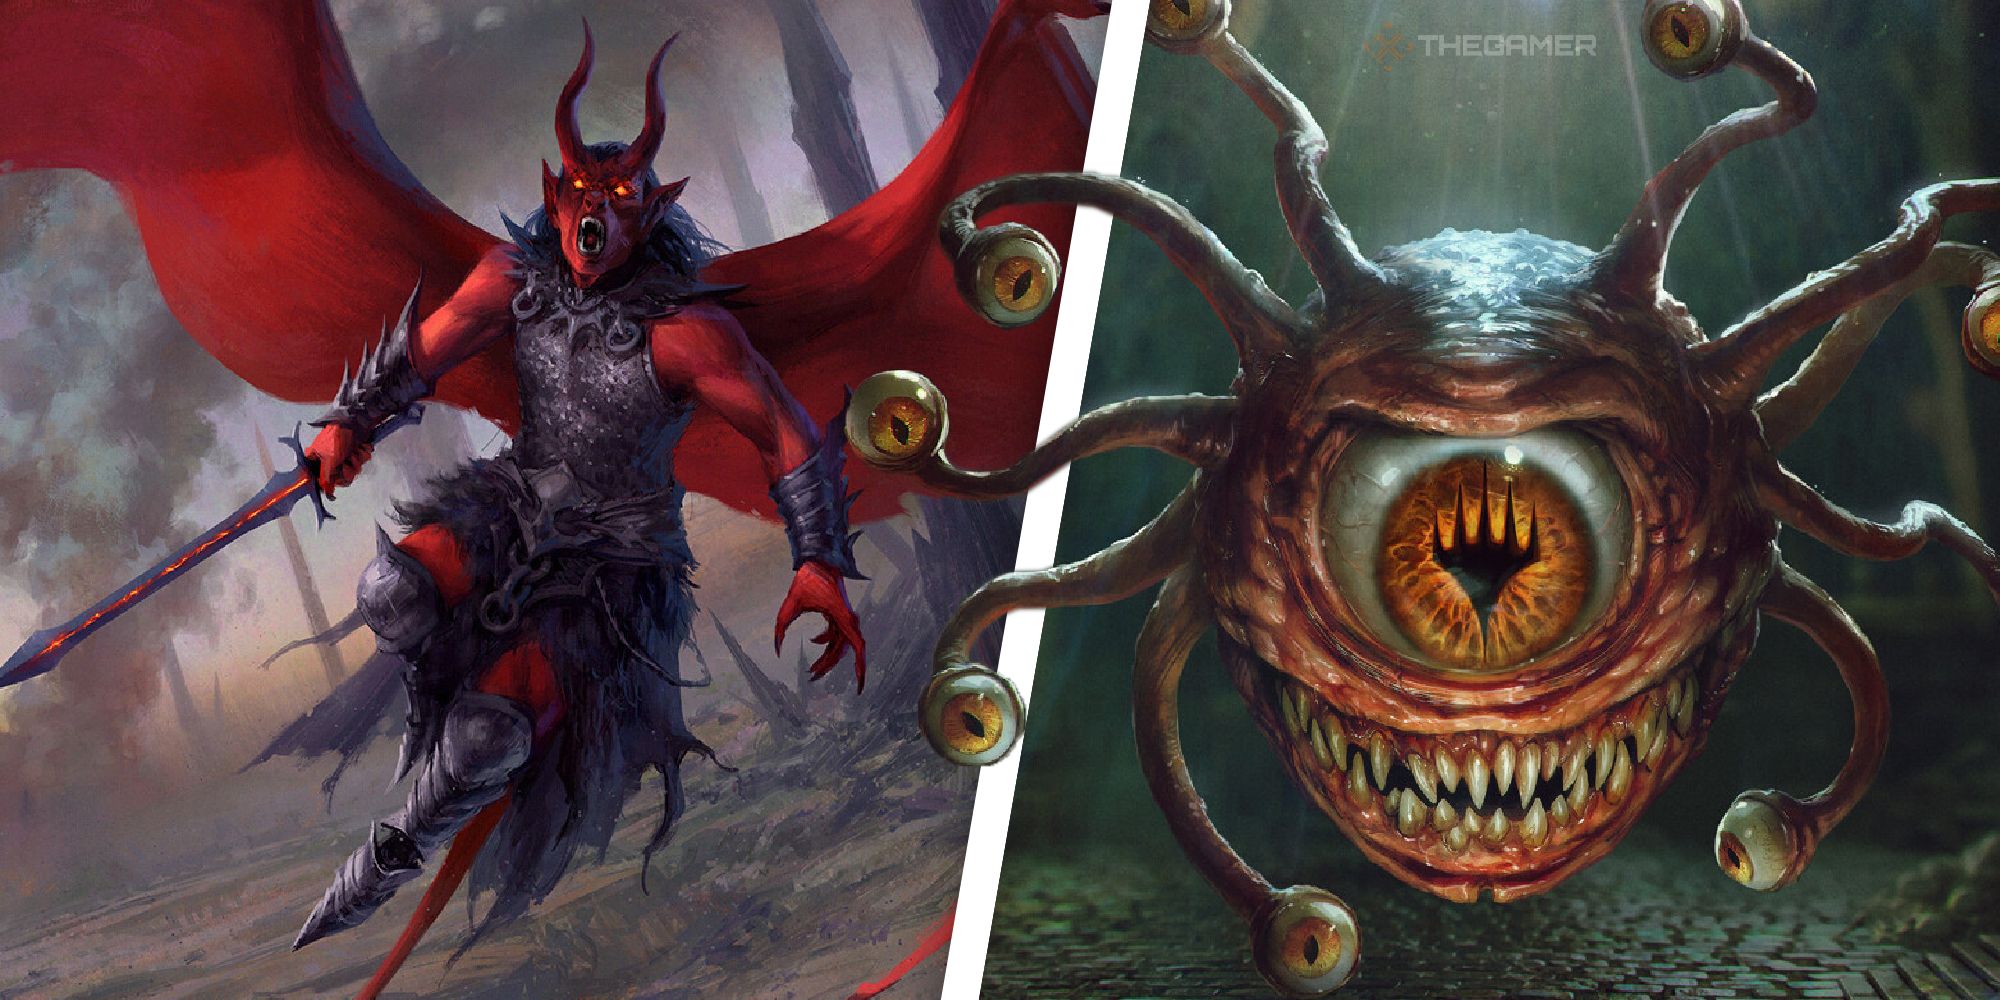 Dungeons & Dragons Collage image of a beholder and a demon flying